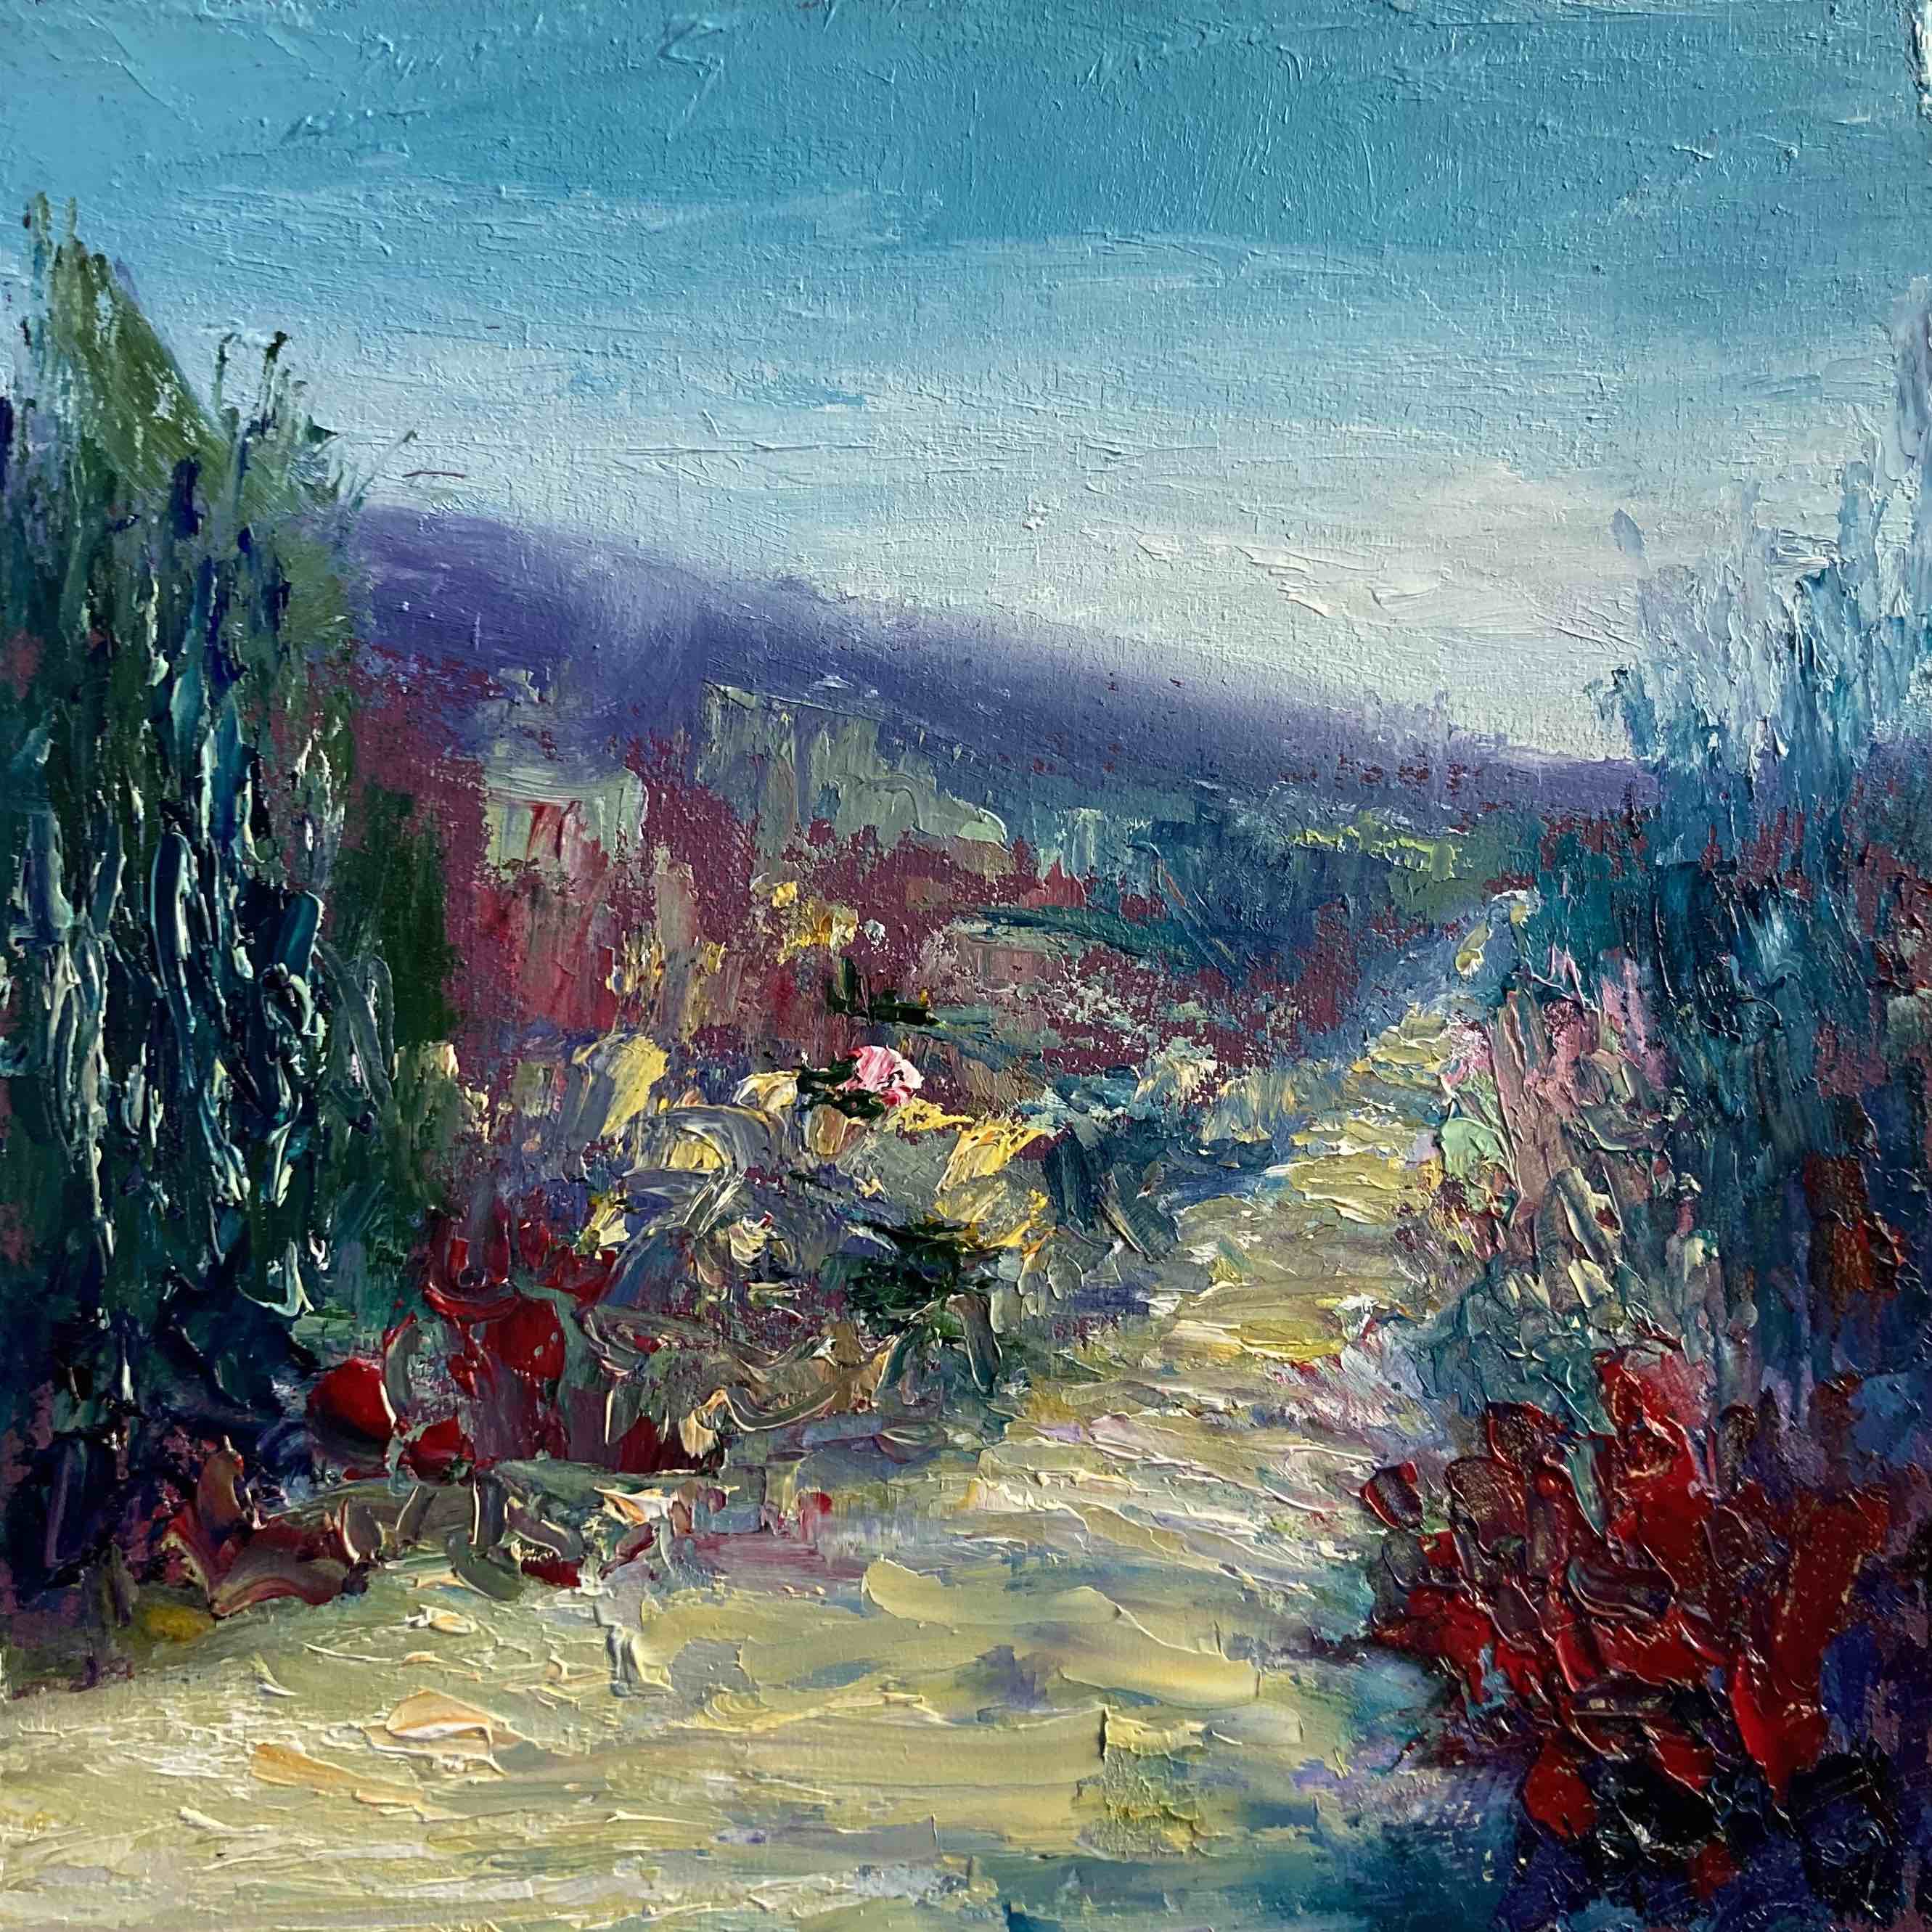 Palette knife, alla prima, impressionistic oil painting of a path with trees and distance mountains by Shannon Grissom